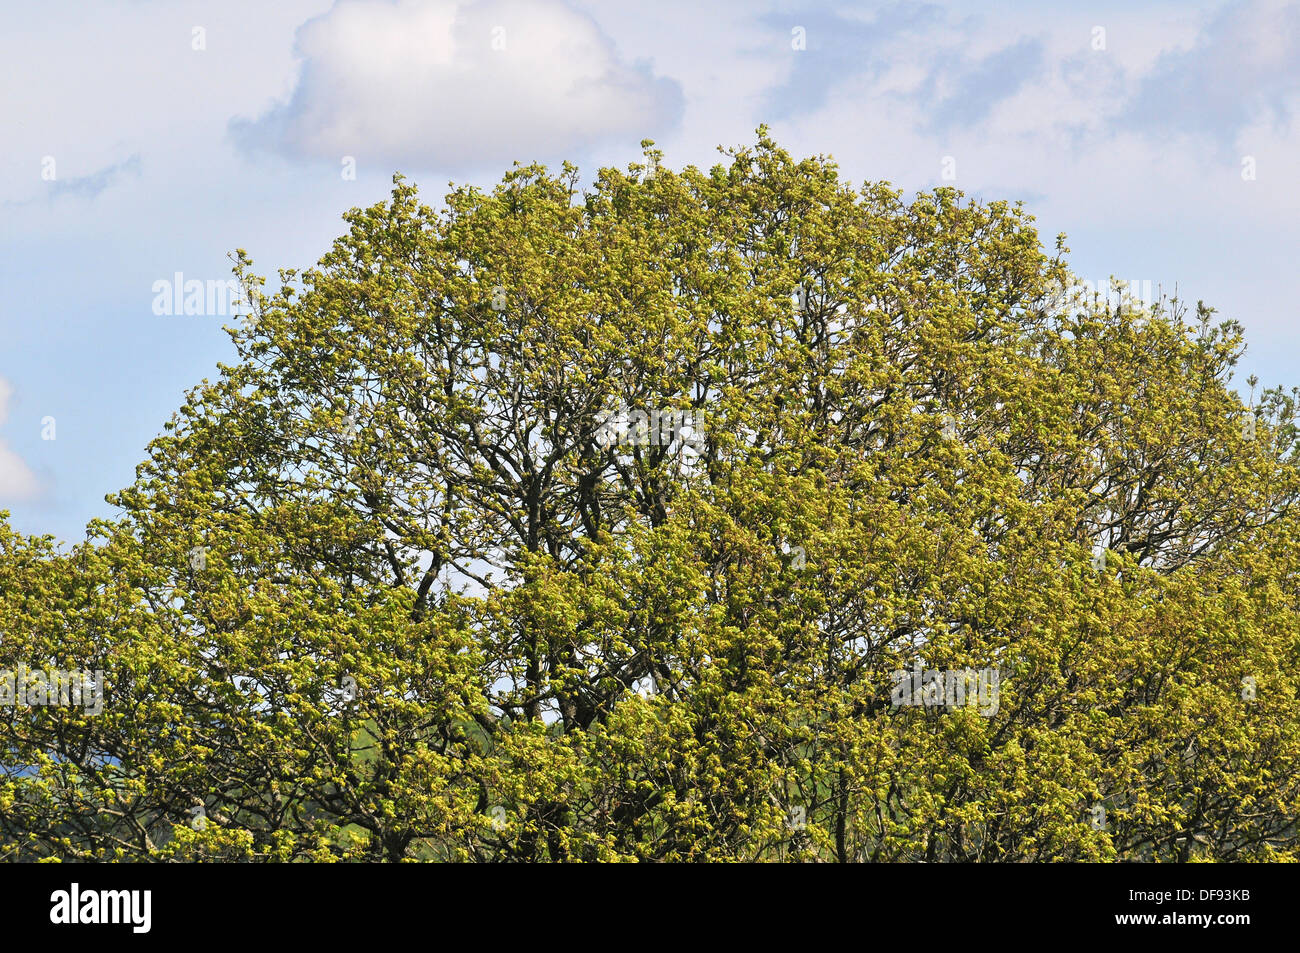 The crown of a mature oak tree with the bright green leaves of early spring. Stock Photo